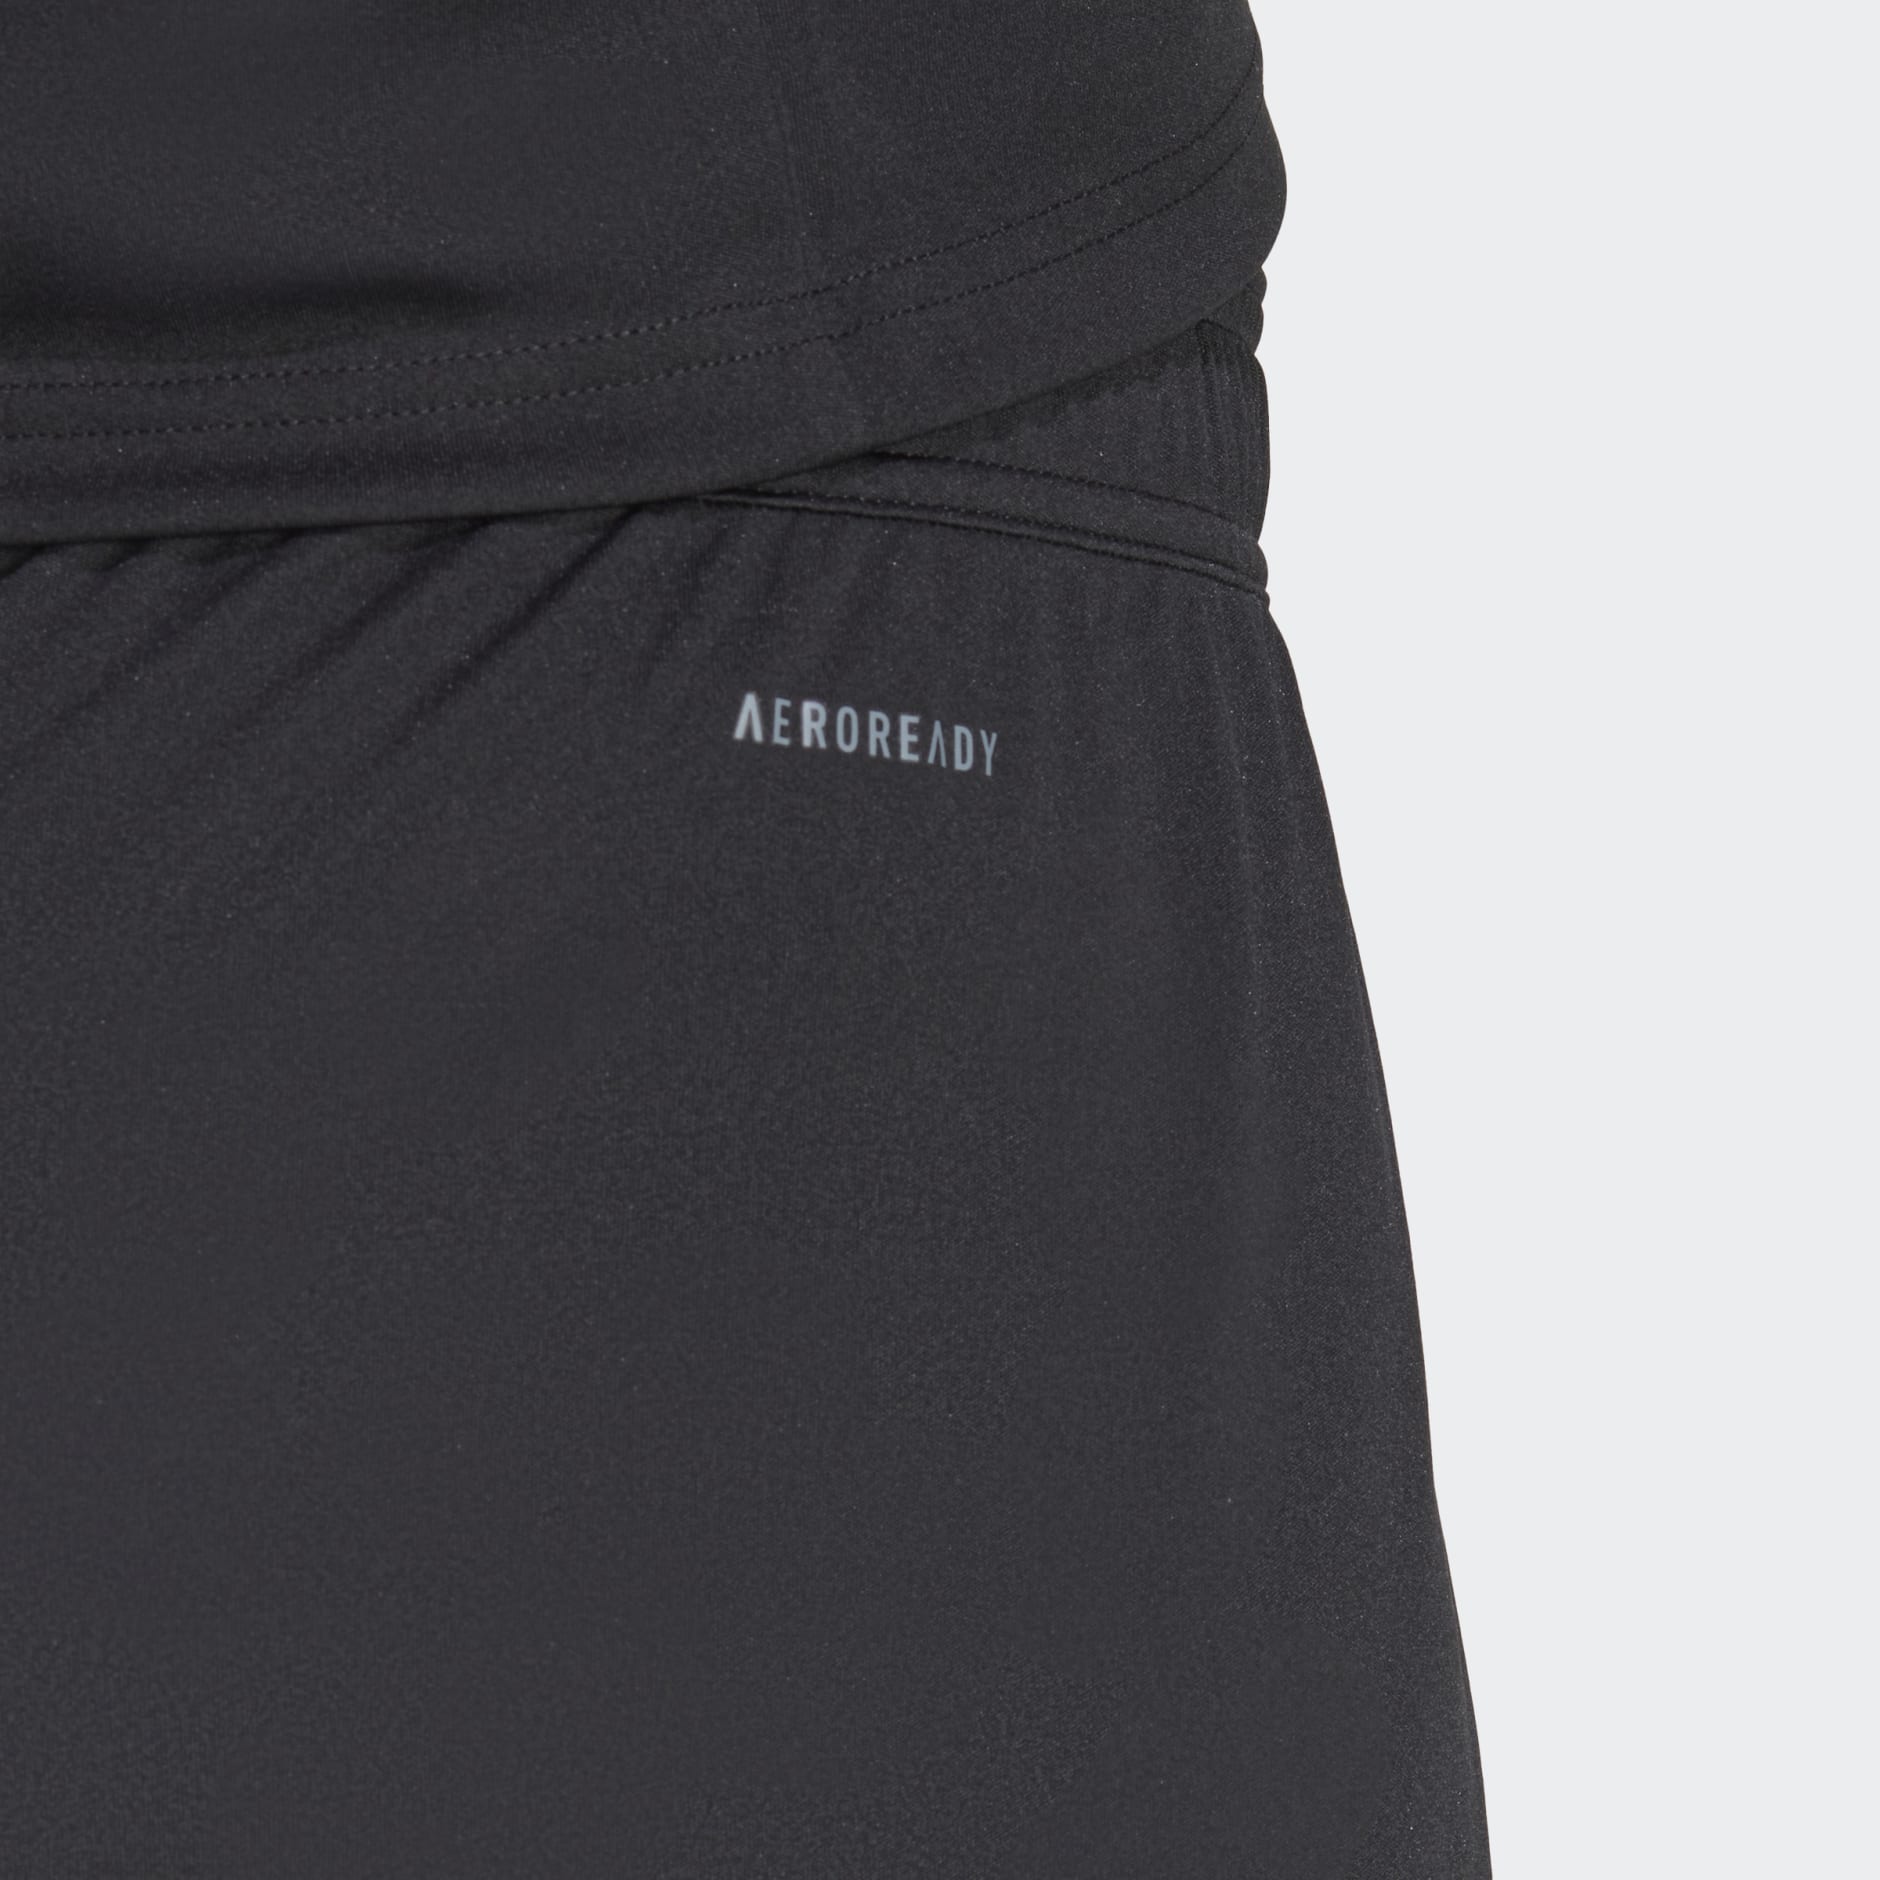 Clothing - Fortore 23 Shorts - Black | adidas South Africa